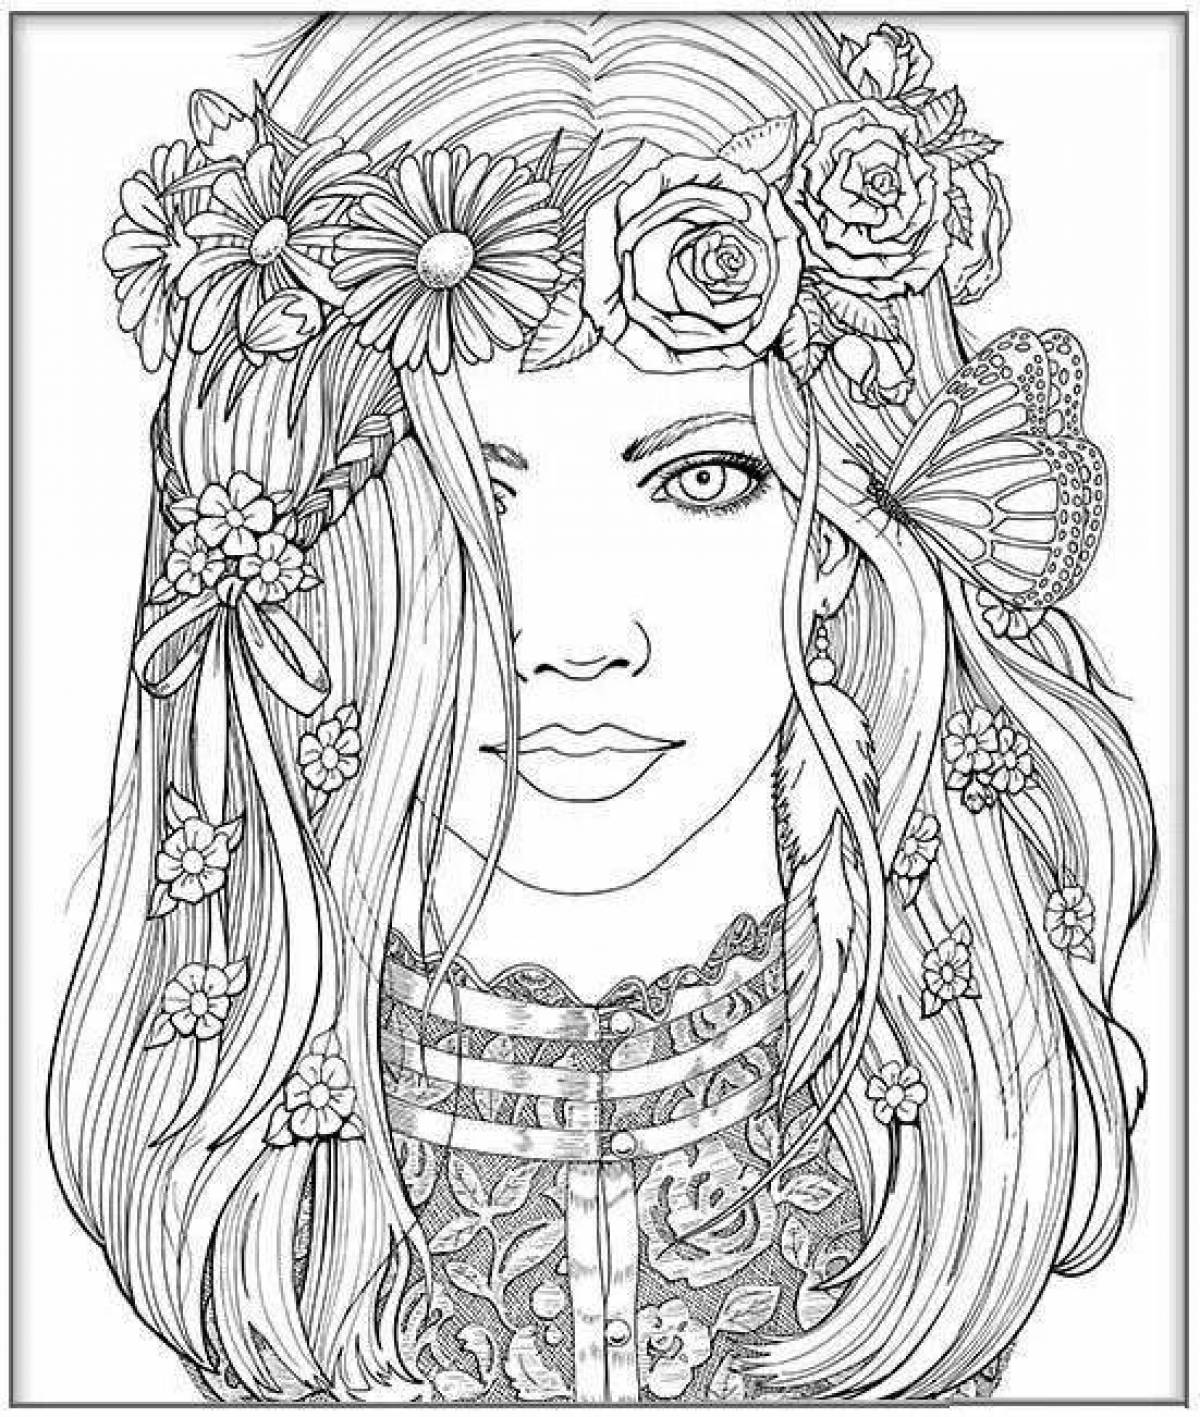 Charming coloring book for women